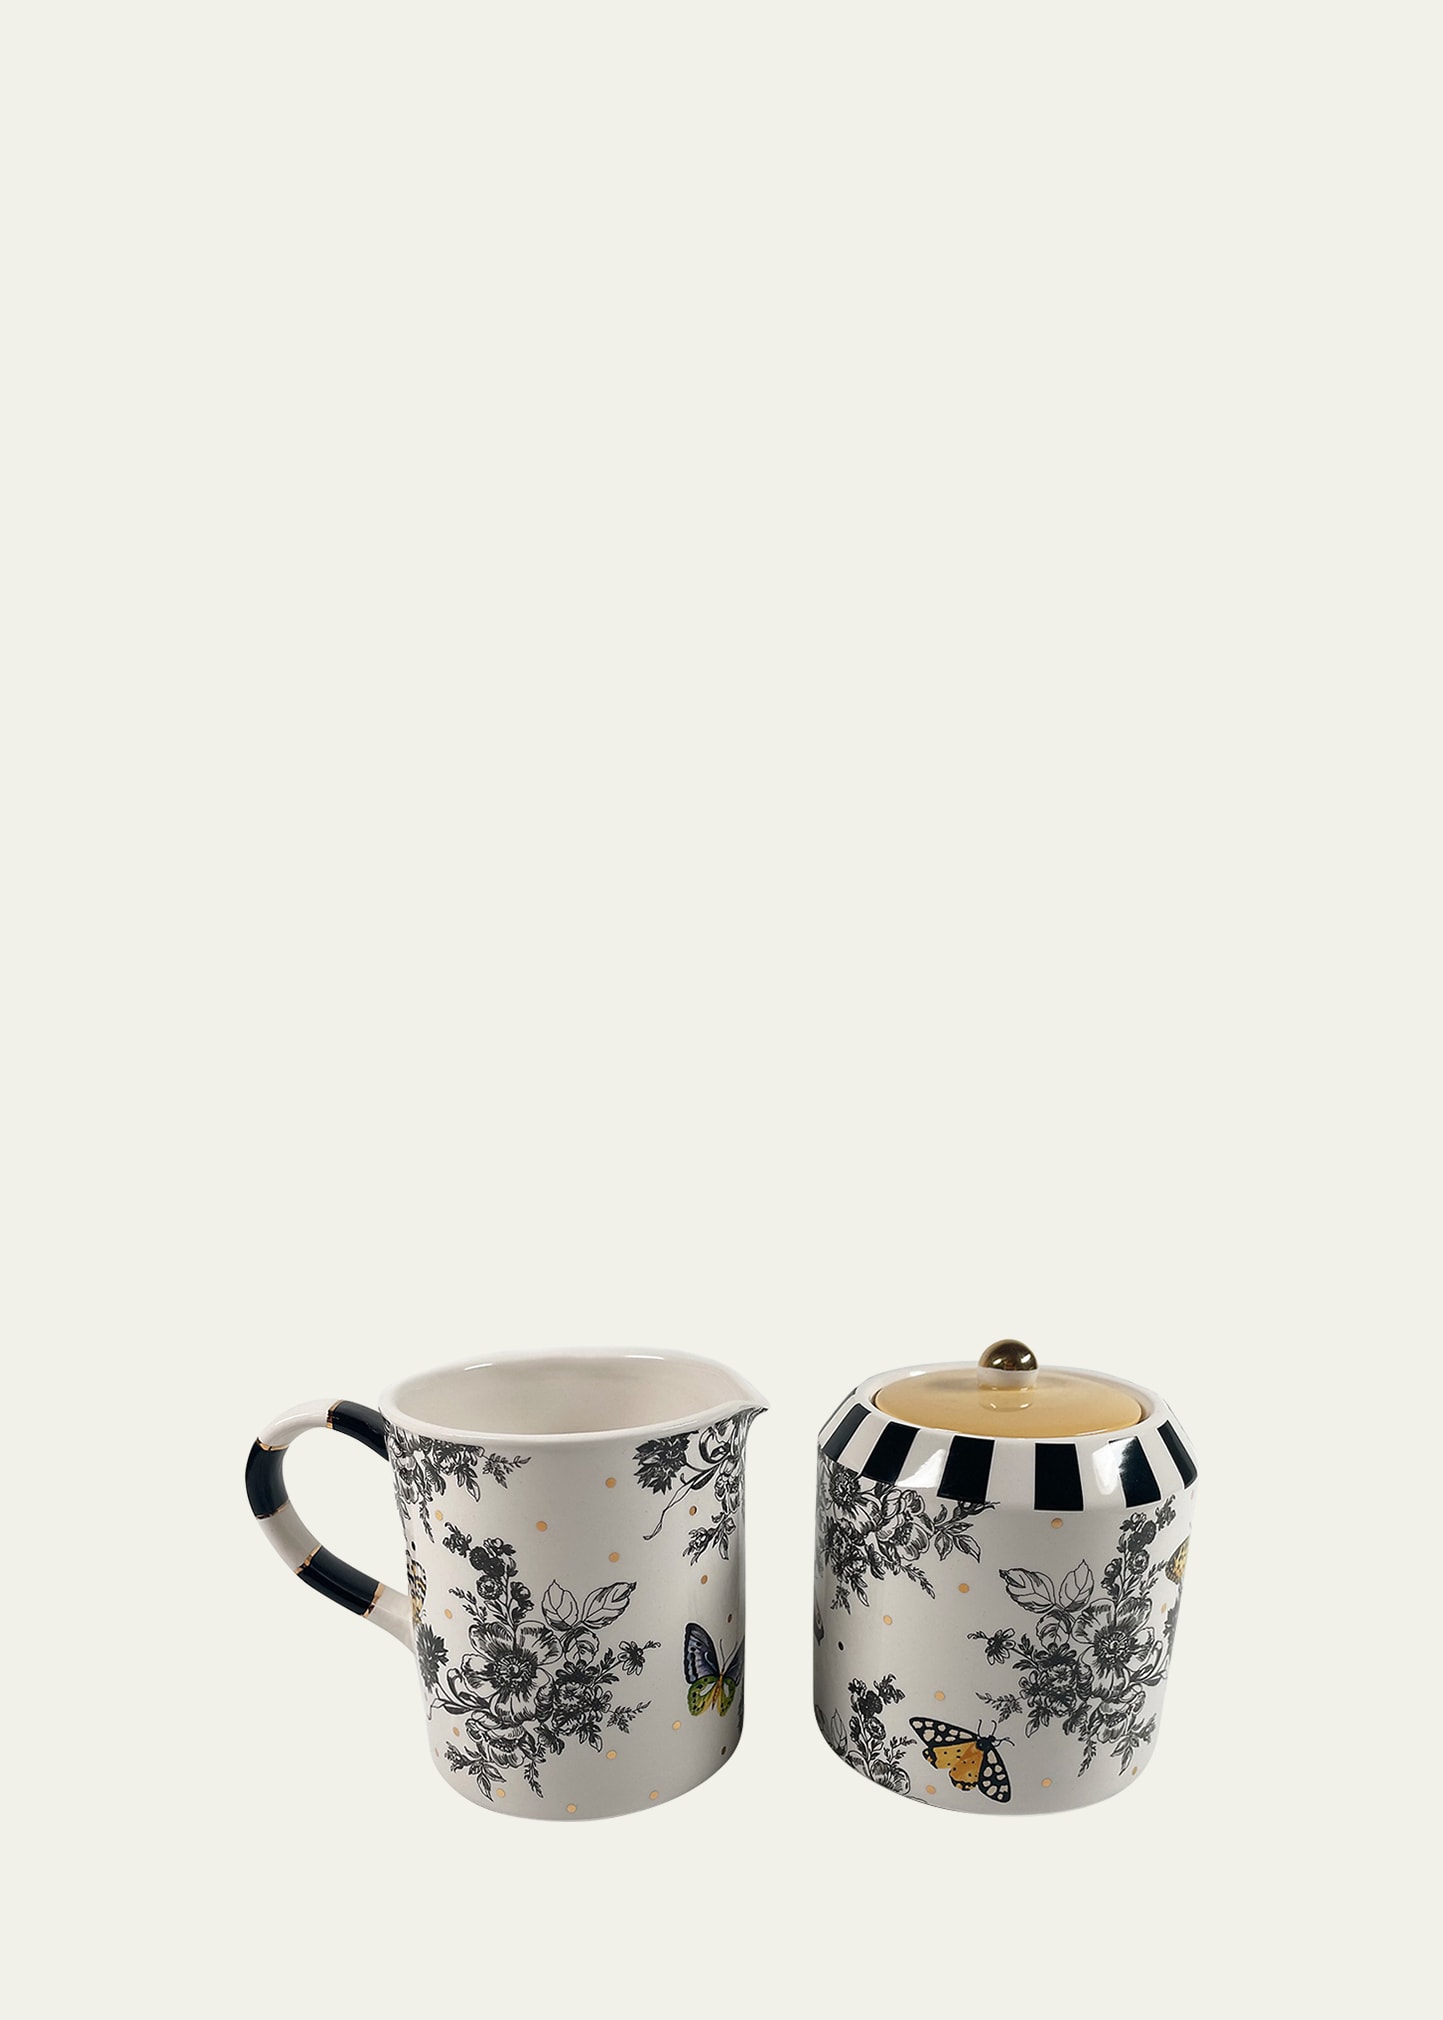 Mackenzie-childs Butterfly Toile Creamer And Sugar Set In Gray